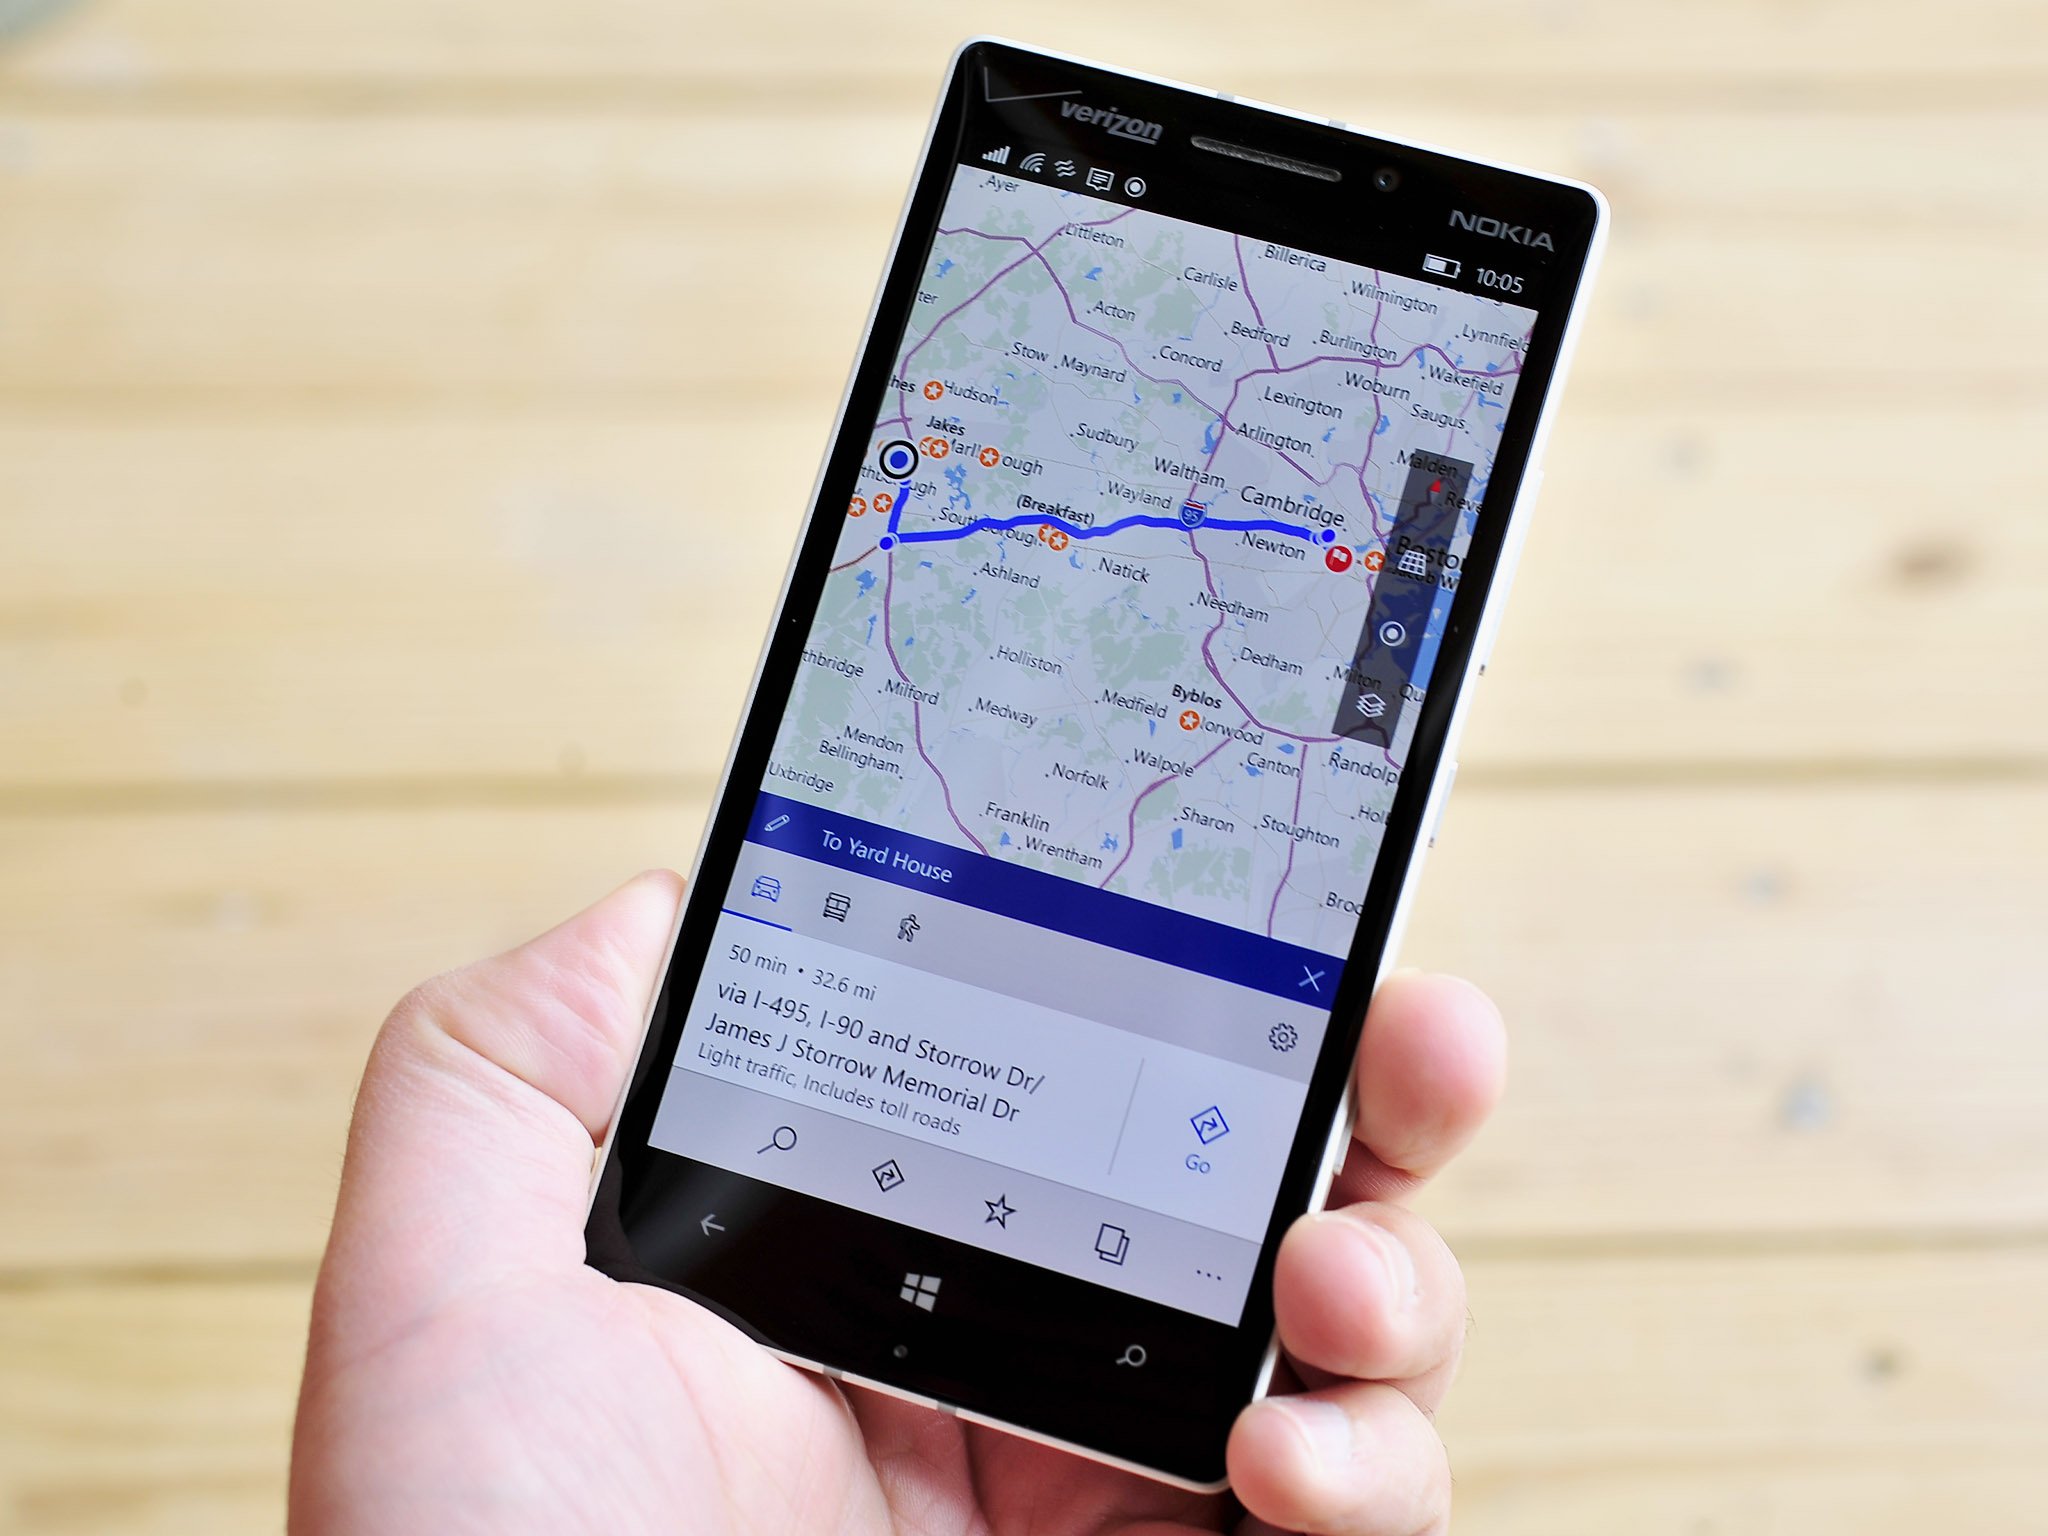 Windows Maps for Fast ring now lets you submit corrections